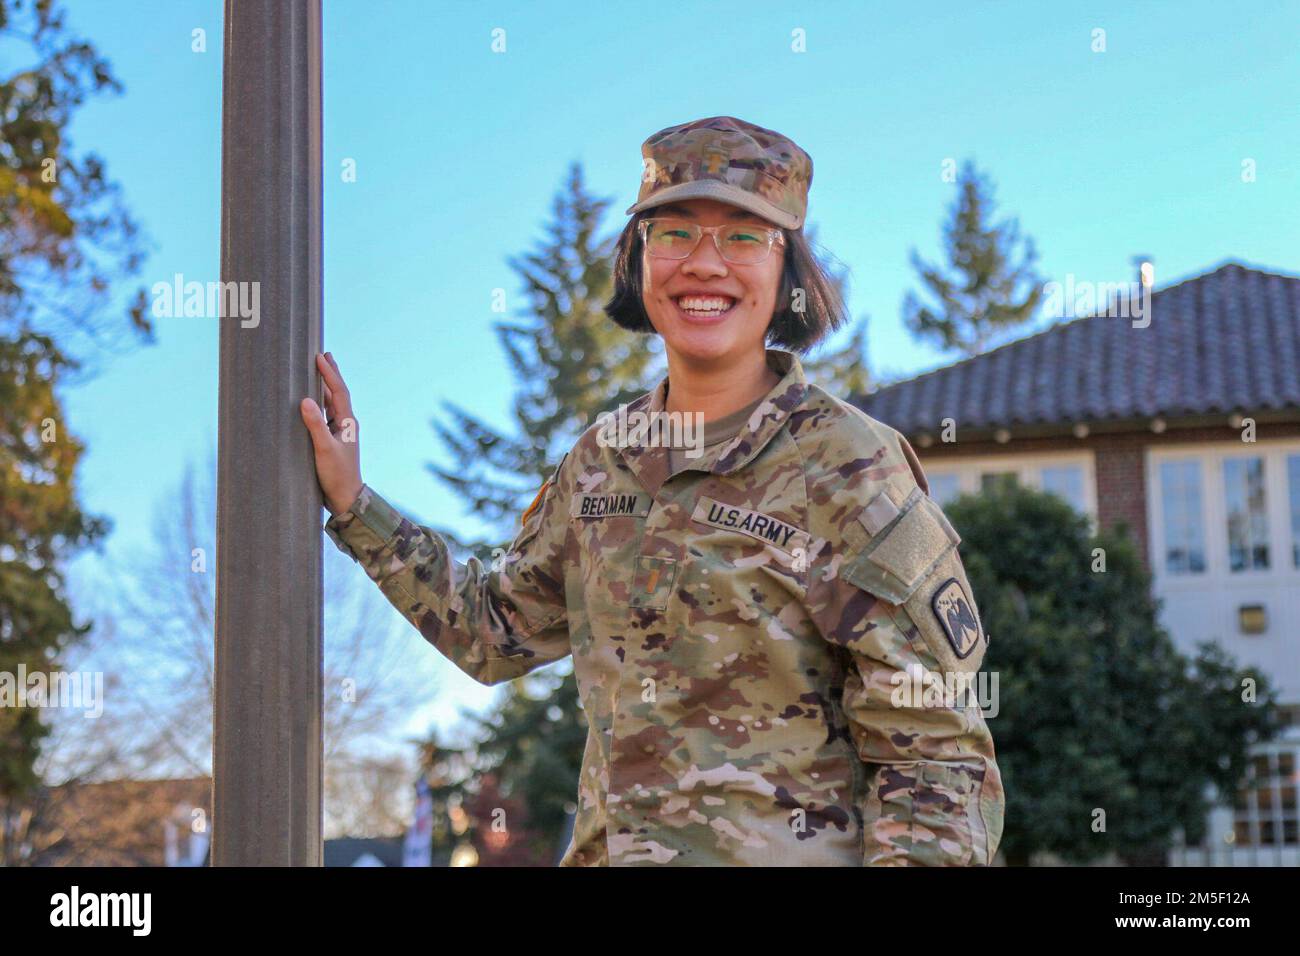 2nd Lt. Annie Beckman is a Signal Officer from Ann Arbor, Mich., assigned to Charlie Company, 46th Aviation Support Battalion, 16th Combat Aviation Brigade at Joint Base Lewis-McChord, Wash. Stock Photo